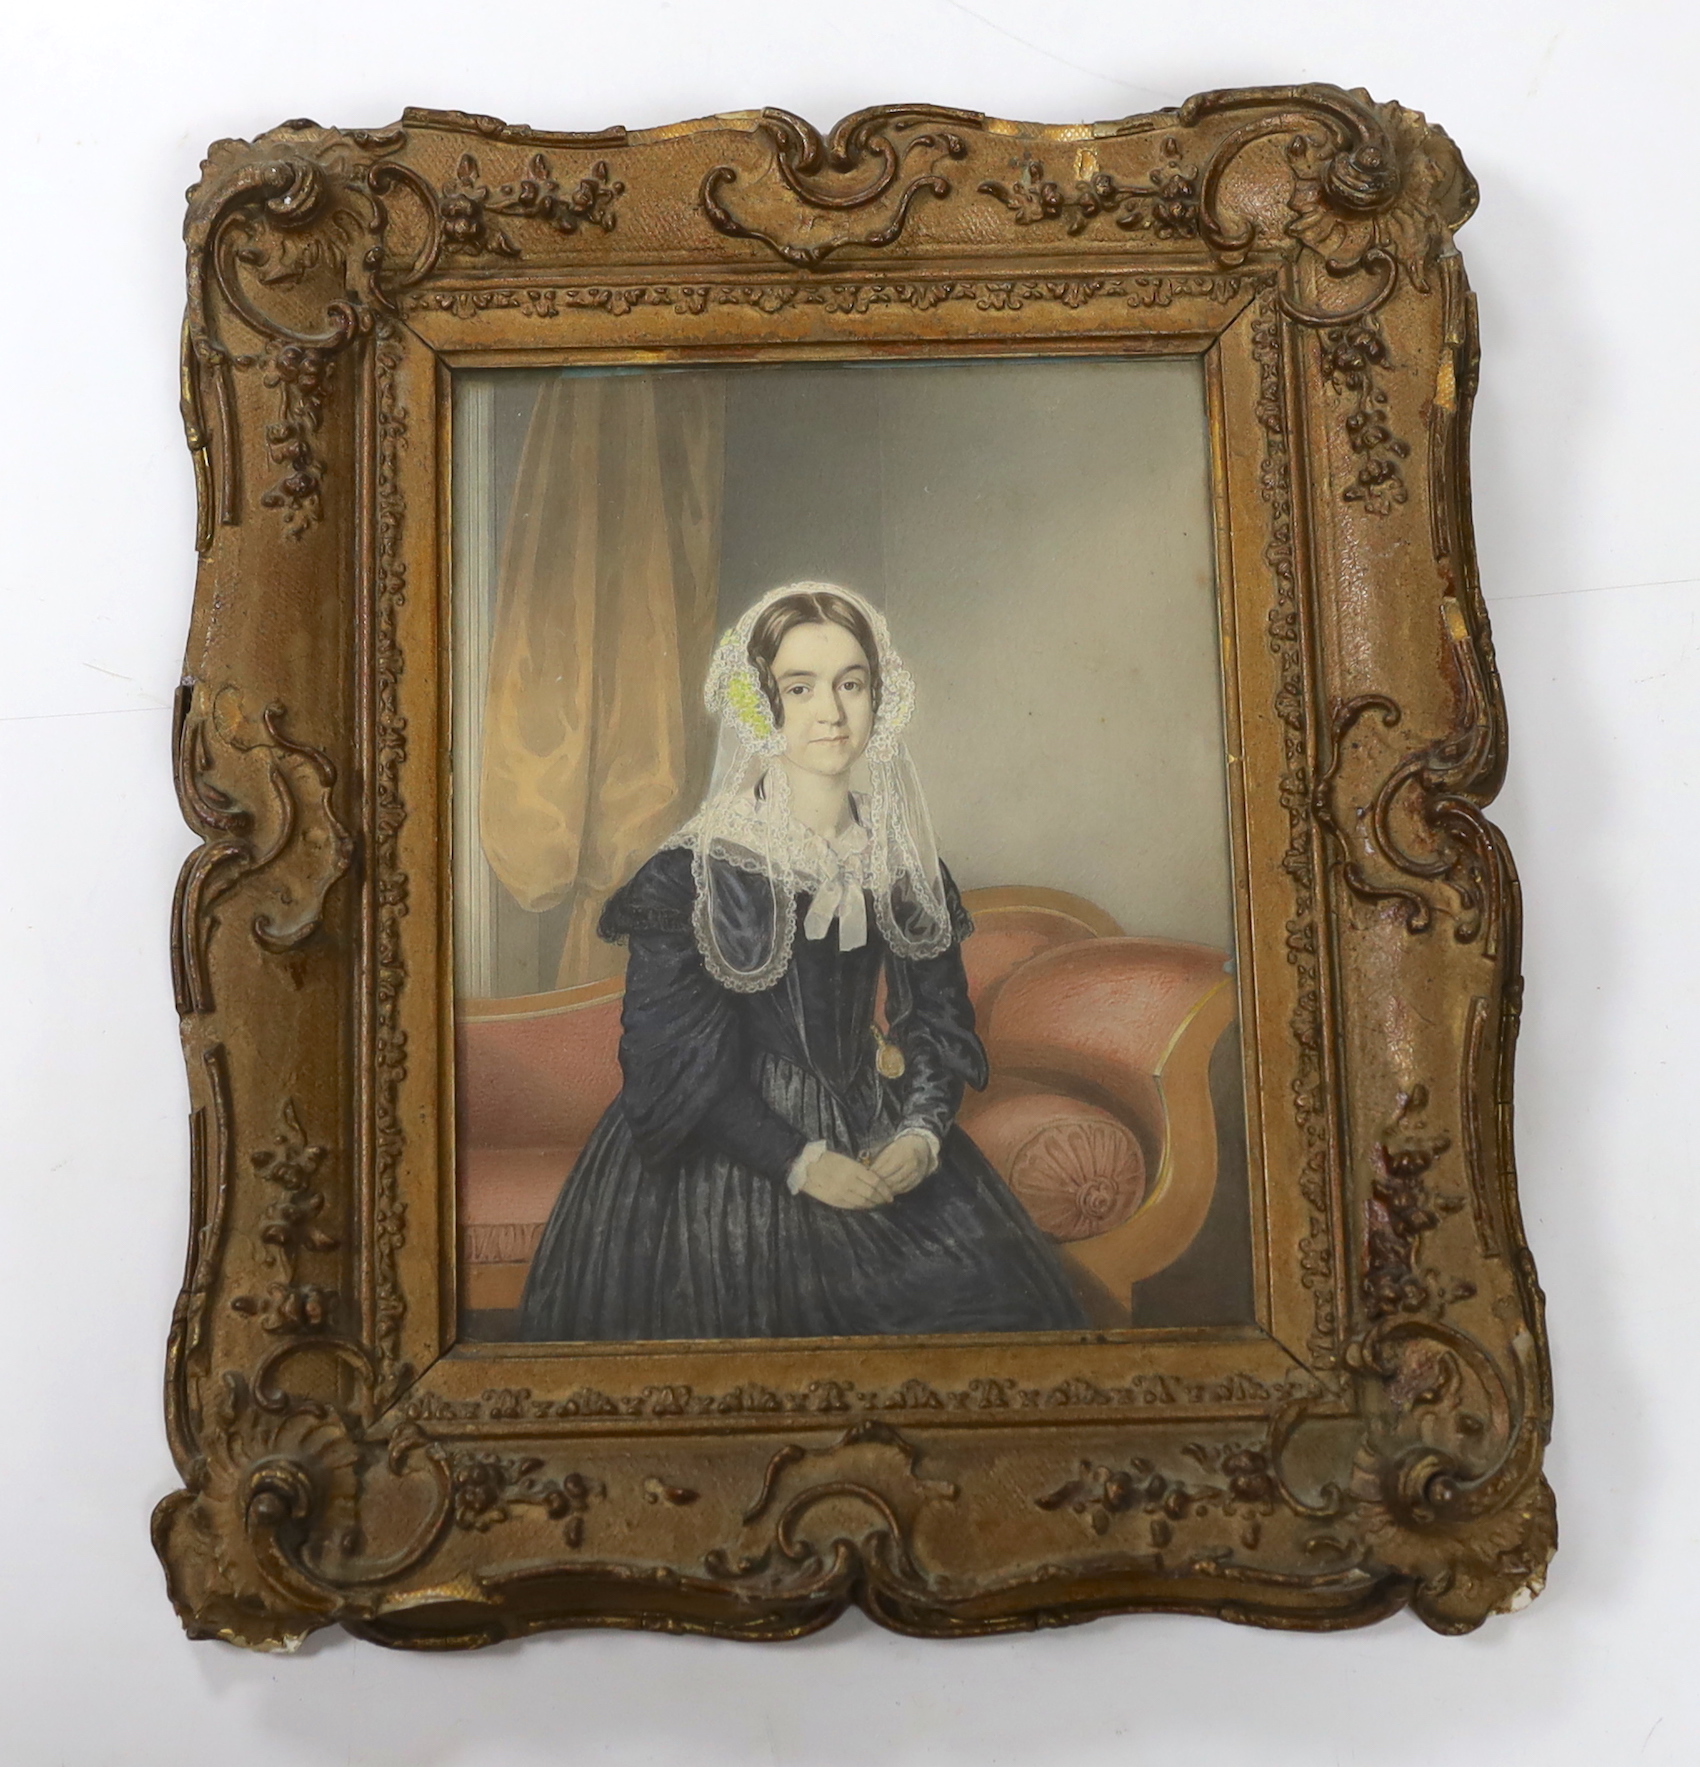 W.W. Waite (19th. C), watercolour on card, Portrait of a seated lady wearing a lace bonnet and collar, signed and dated 1844, 22 x 17cm